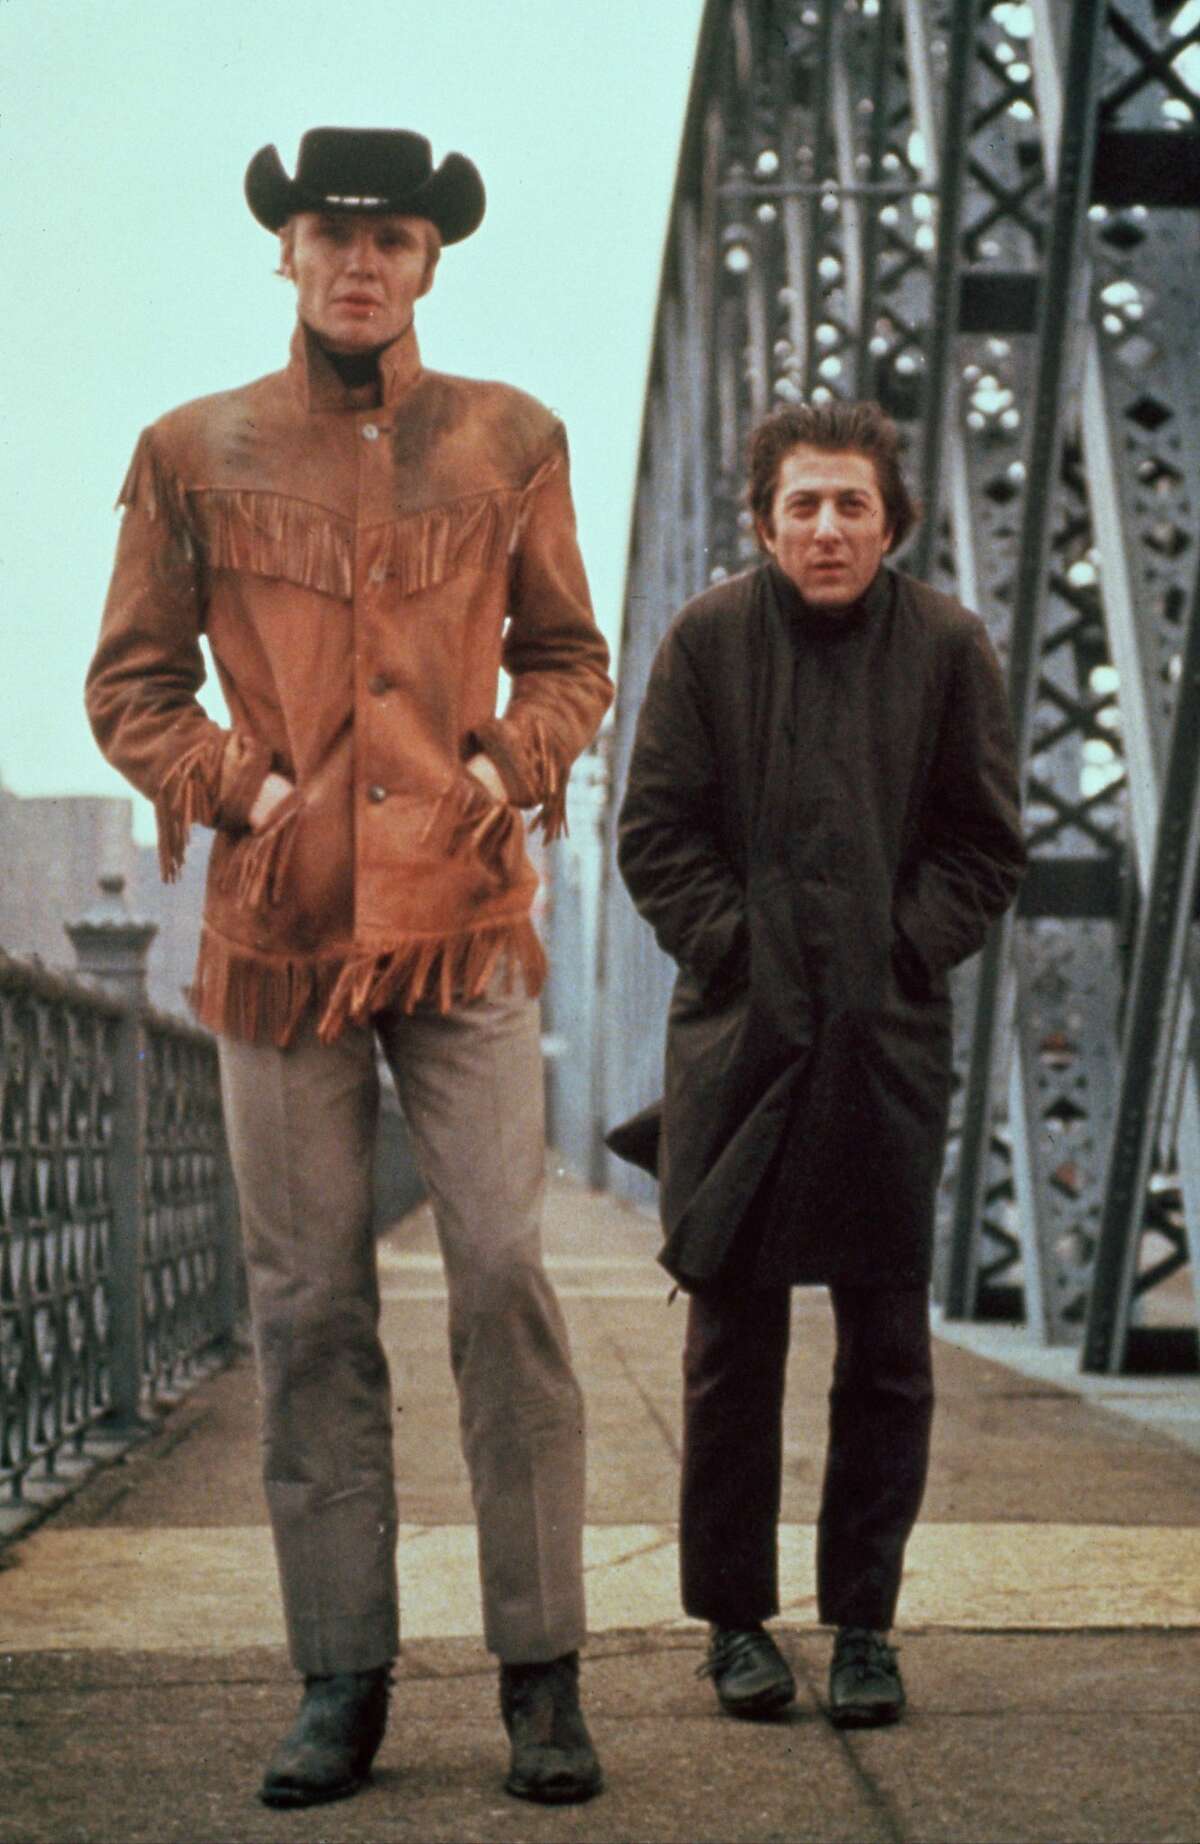 MIDNIGHT COWBOY -- Jon Voight, Dustin Hoffman in "Midnight Cowboy". "Reel Radicals: The Sixties Revolution in Film." HOUCHRON CAPTION (04/02/2002): Documentary examines films of the 1960s, like "Midnight Cowboy," above. HOUCHRON CAPTION (07/26/2003): John Schlesinger's 1969 film "Midnight Cowboy," starring Jon Voight, left, and Dustin Hoffman, won three Oscars, including for best director, best picture and best adapted screenplay.